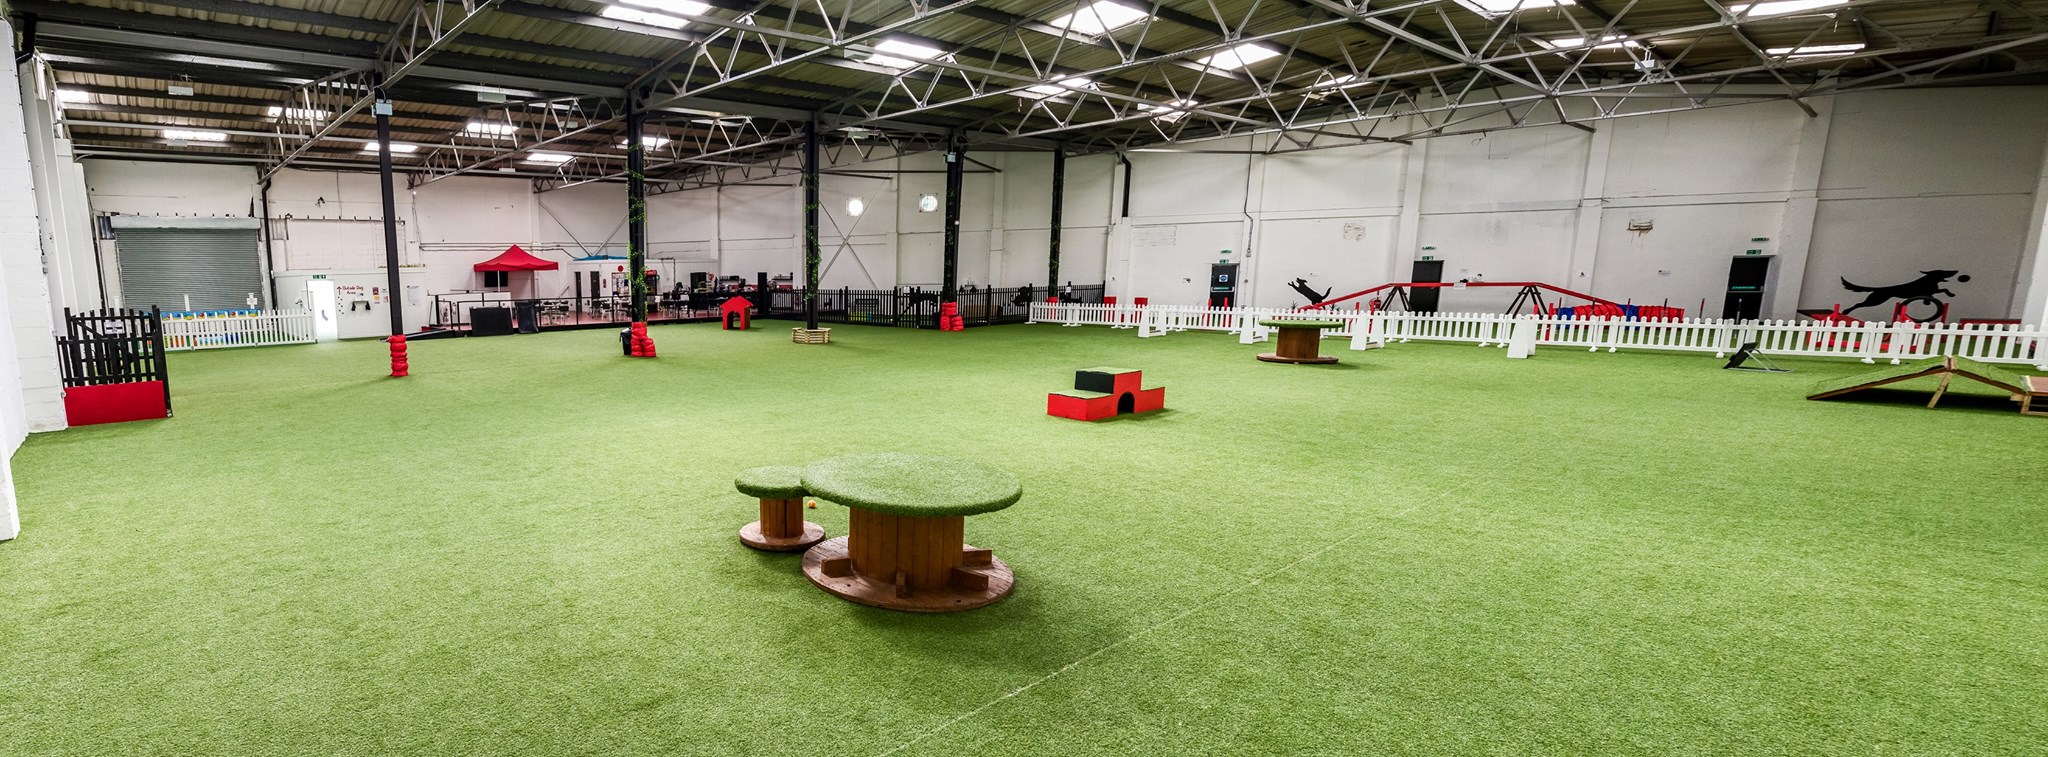 Action Petz | Indoor Dog Park in Cardiff, South Wales